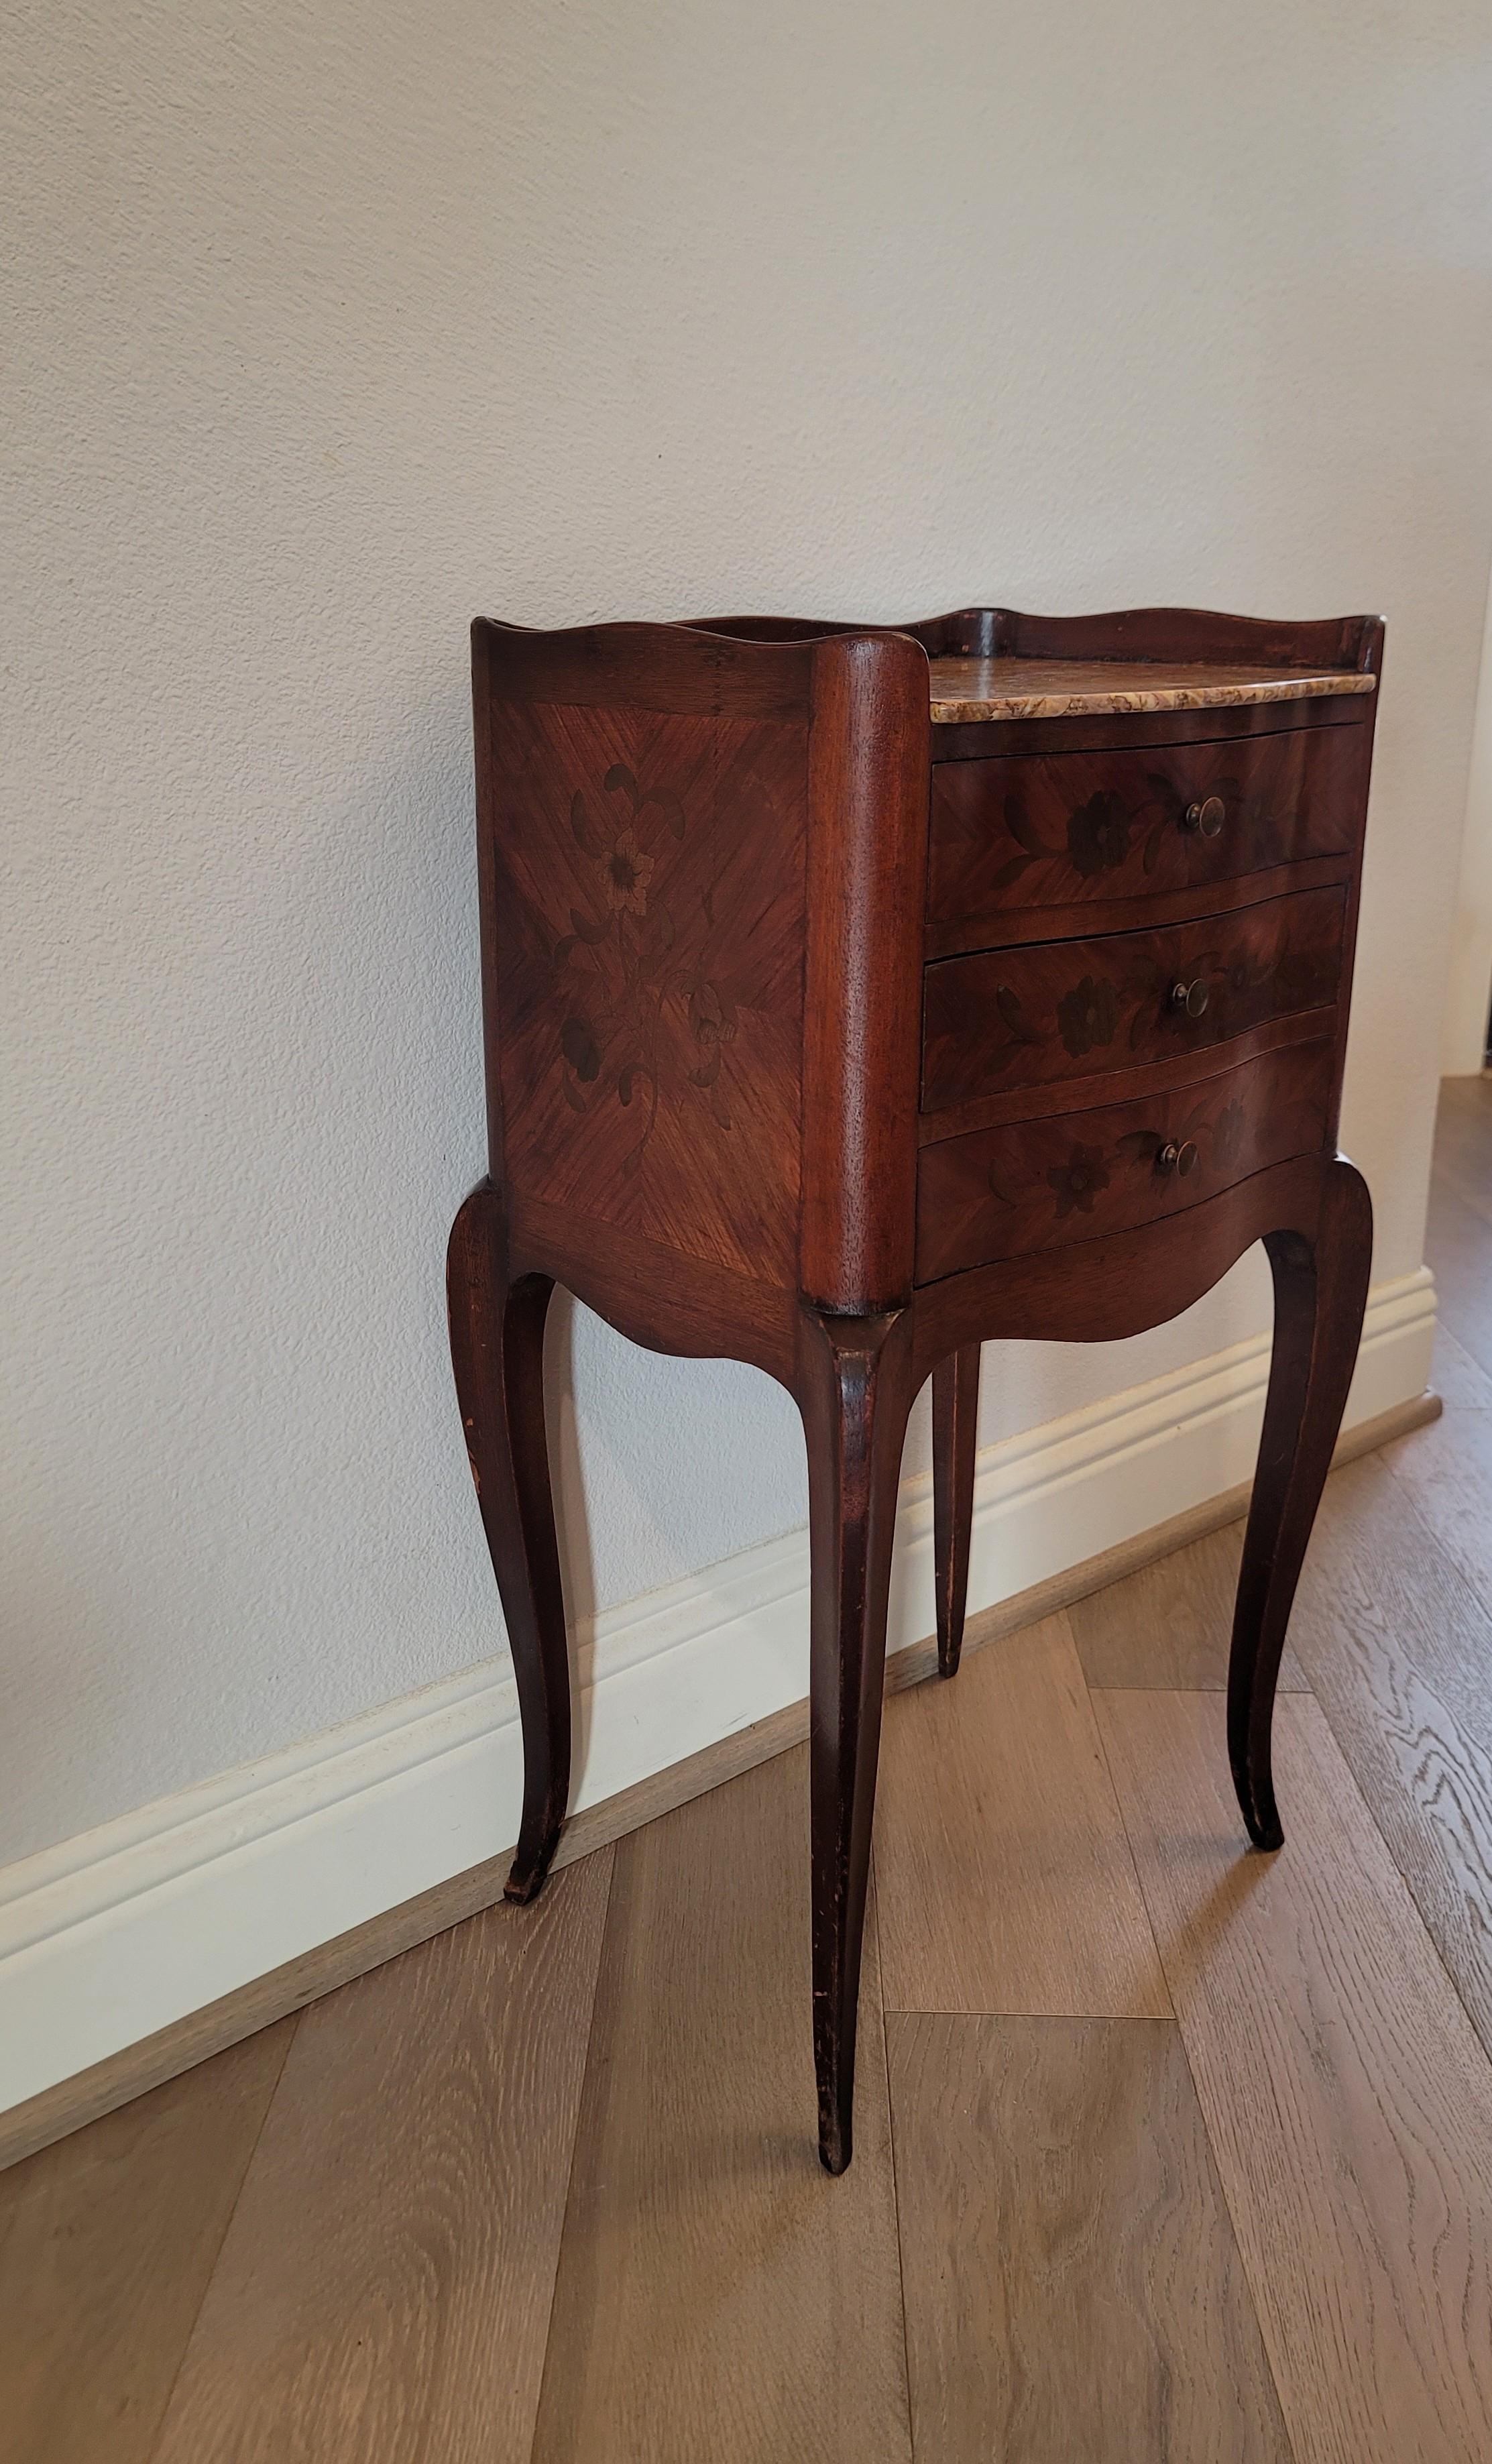 19th Century French Louis XV Style Marquetry Inlaid Nightstand Table For Sale 7